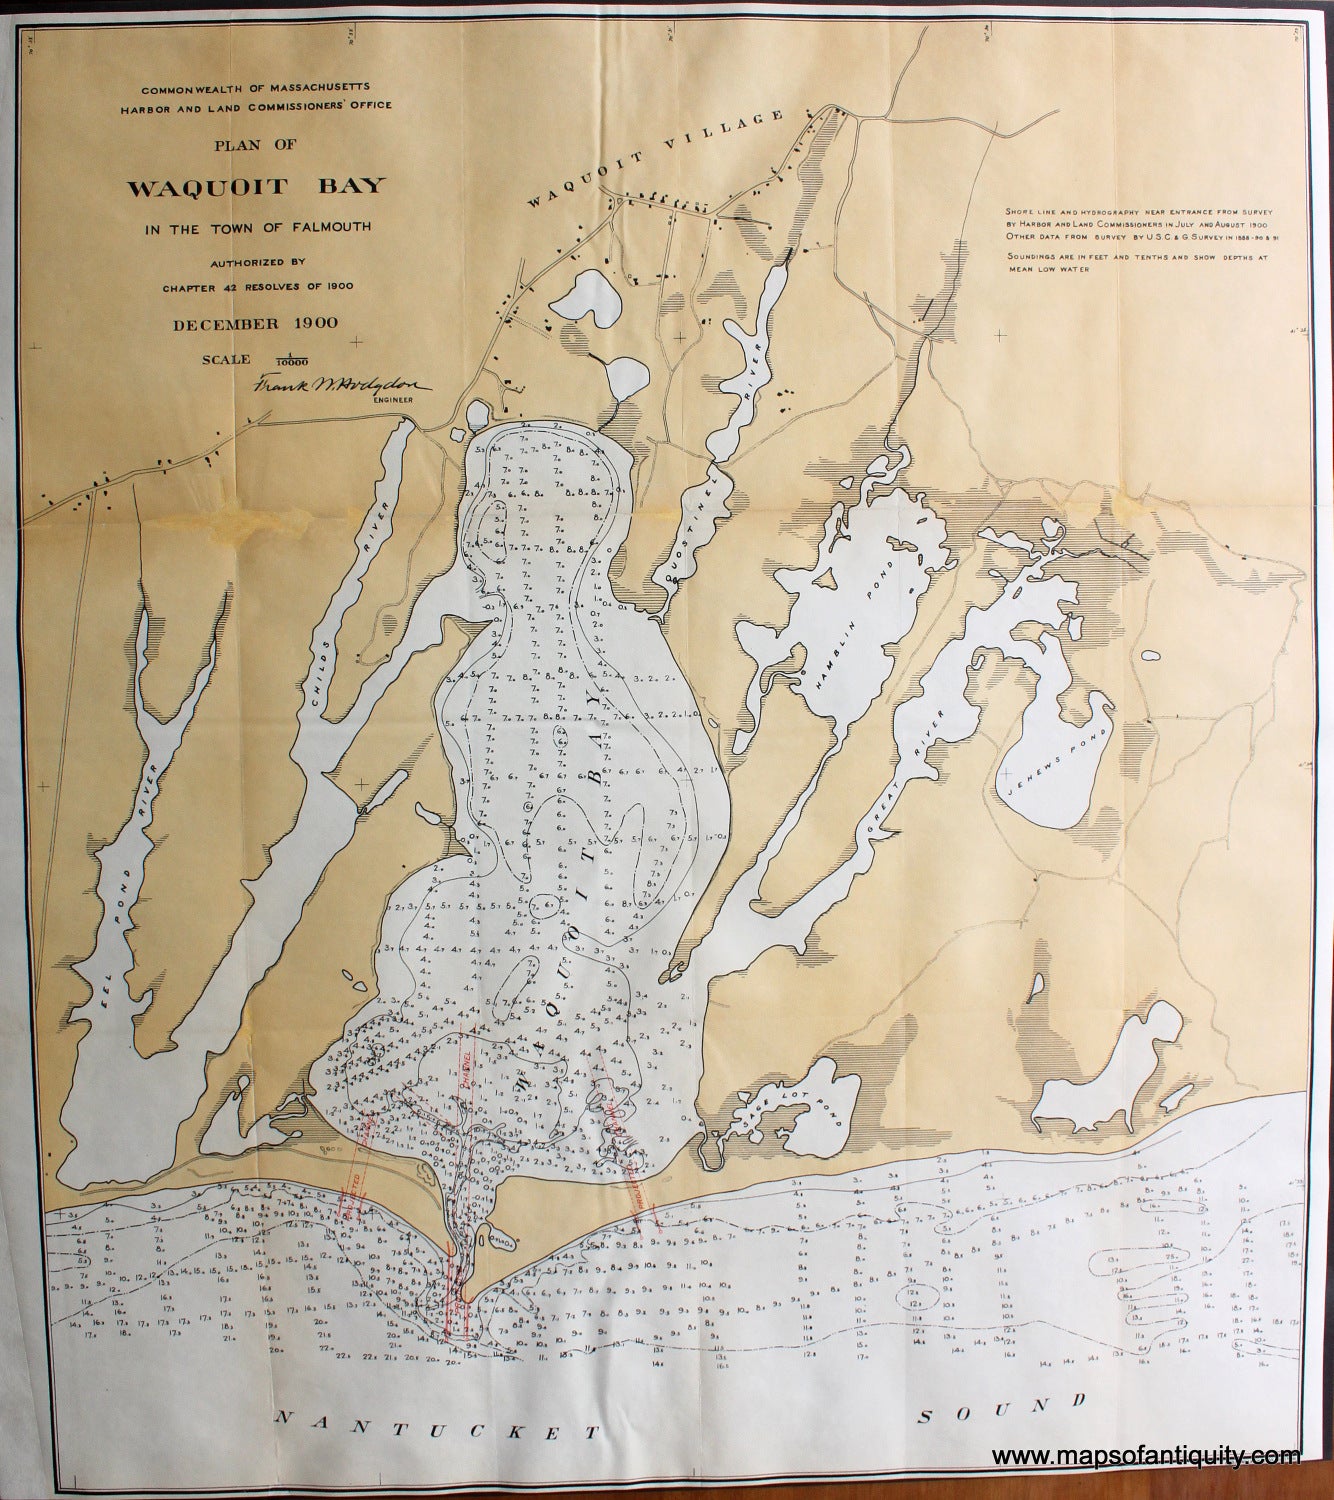 Antique-Printed-Color-Map-Plan-of-Waquoit-Bay-in-the-Town-of-Falmouth-Cape-Cod-&-Islands--1900-Walker-Maps-Of-Antiquity